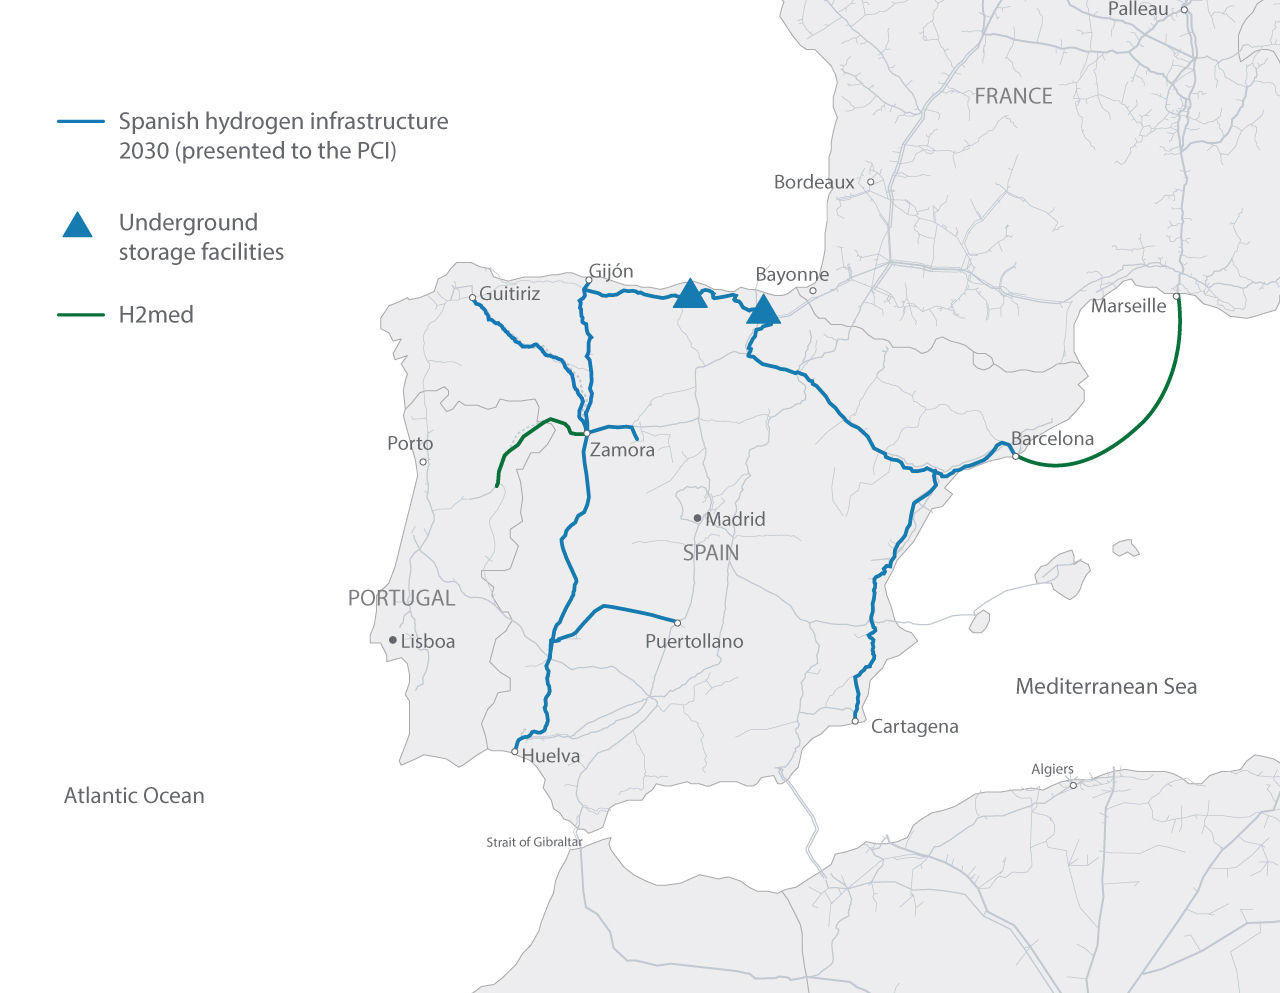 hydrogen infrastructure network proposal for Spain 2030